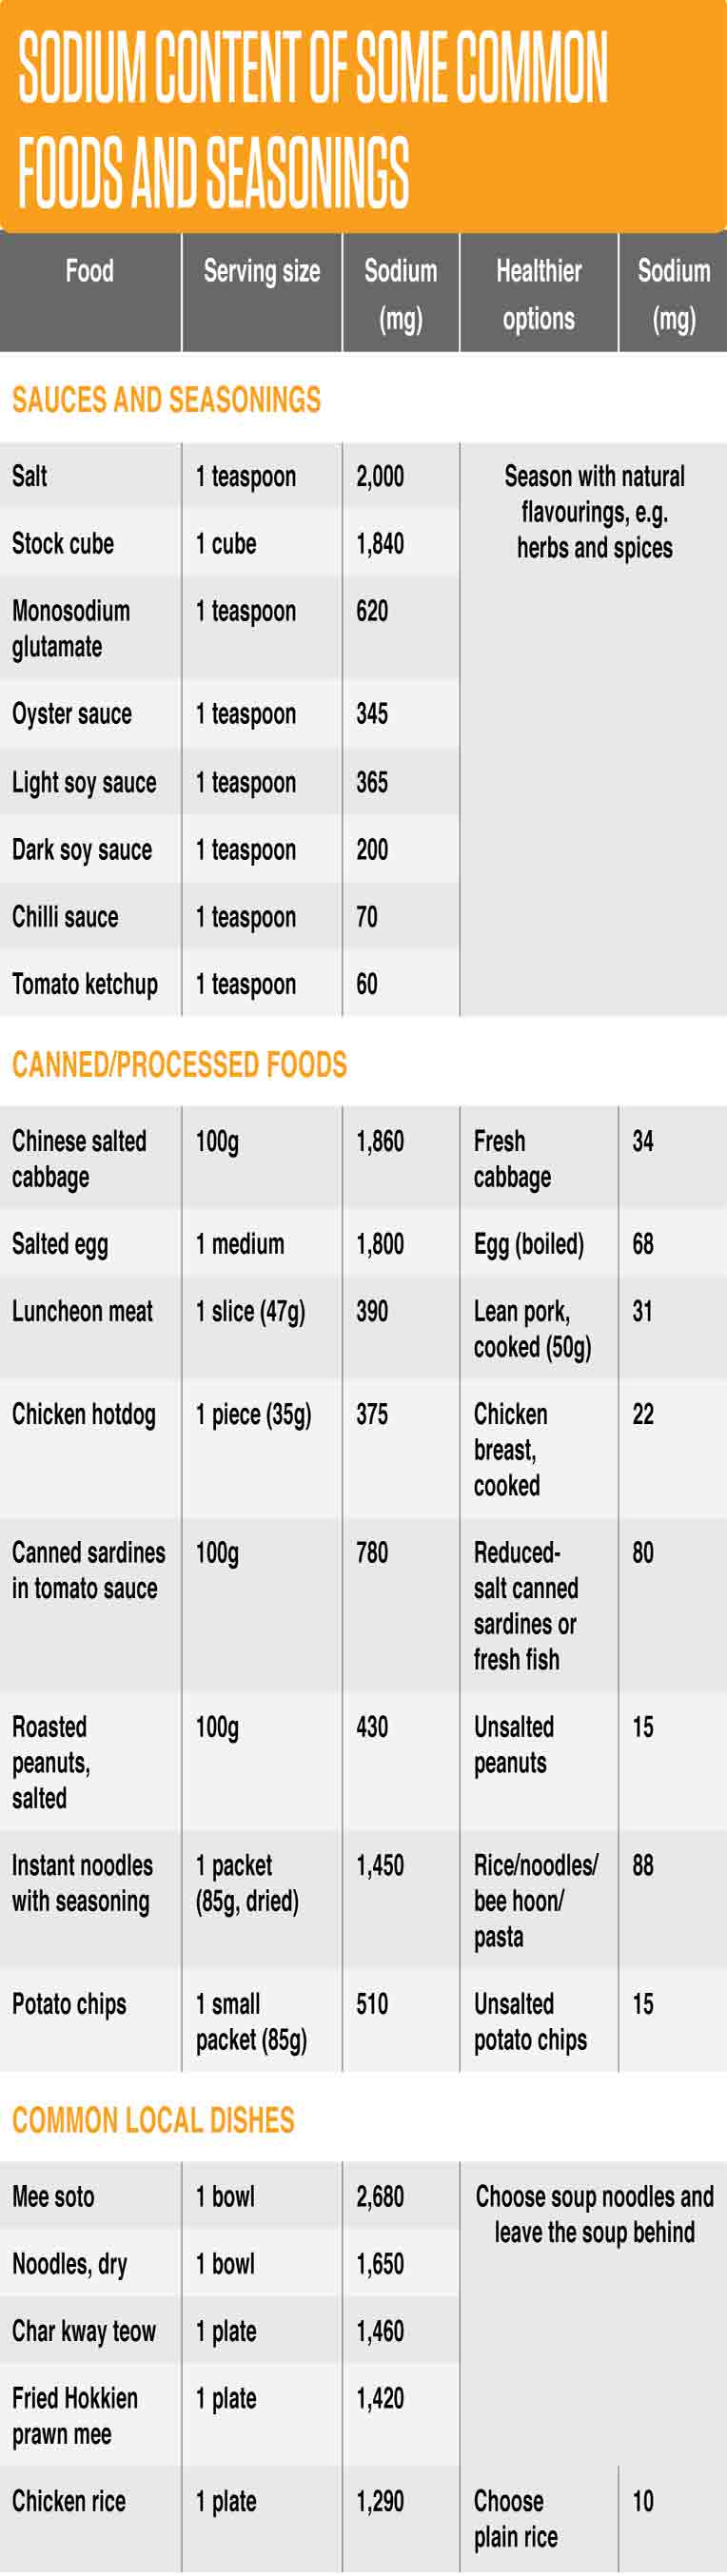 Sodium Content of Common Foods and Seasonings 